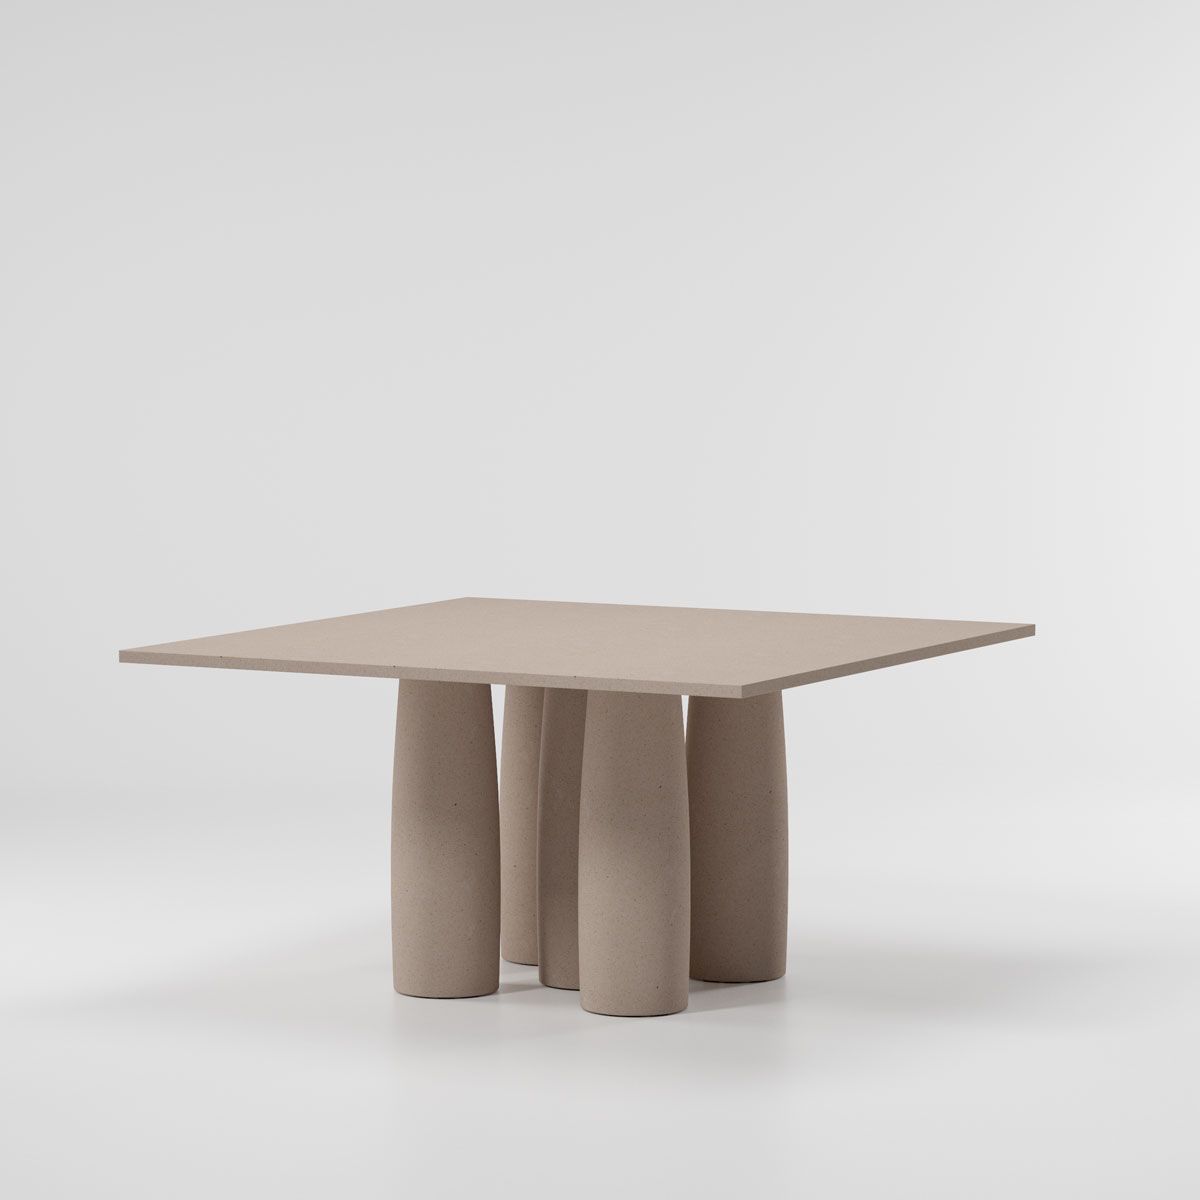 Minera stone dining table 140 x 140 / 8 Guest